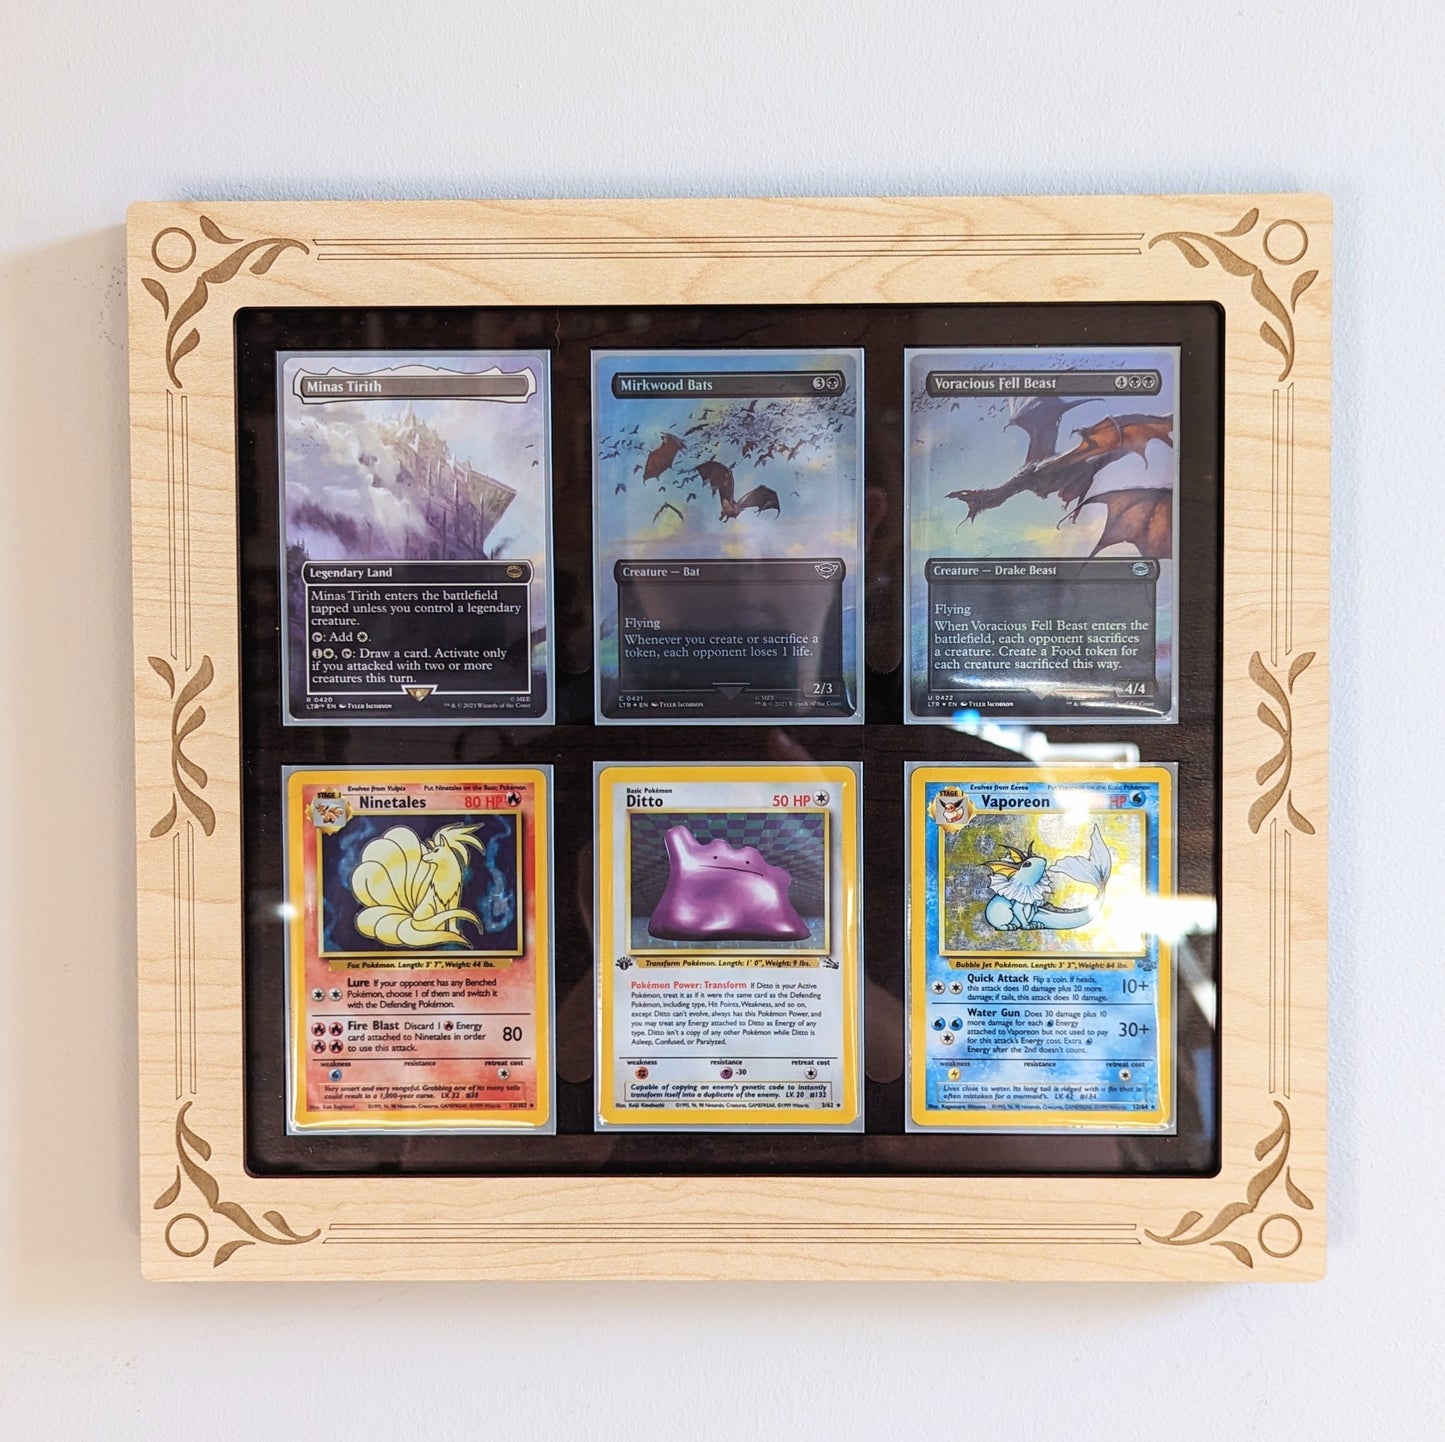 playing card 6-slot display frame, fits cards in standard card sleeves, great for magic the gathering, mistborn cards from Brandon sanderson, pokemon, and more